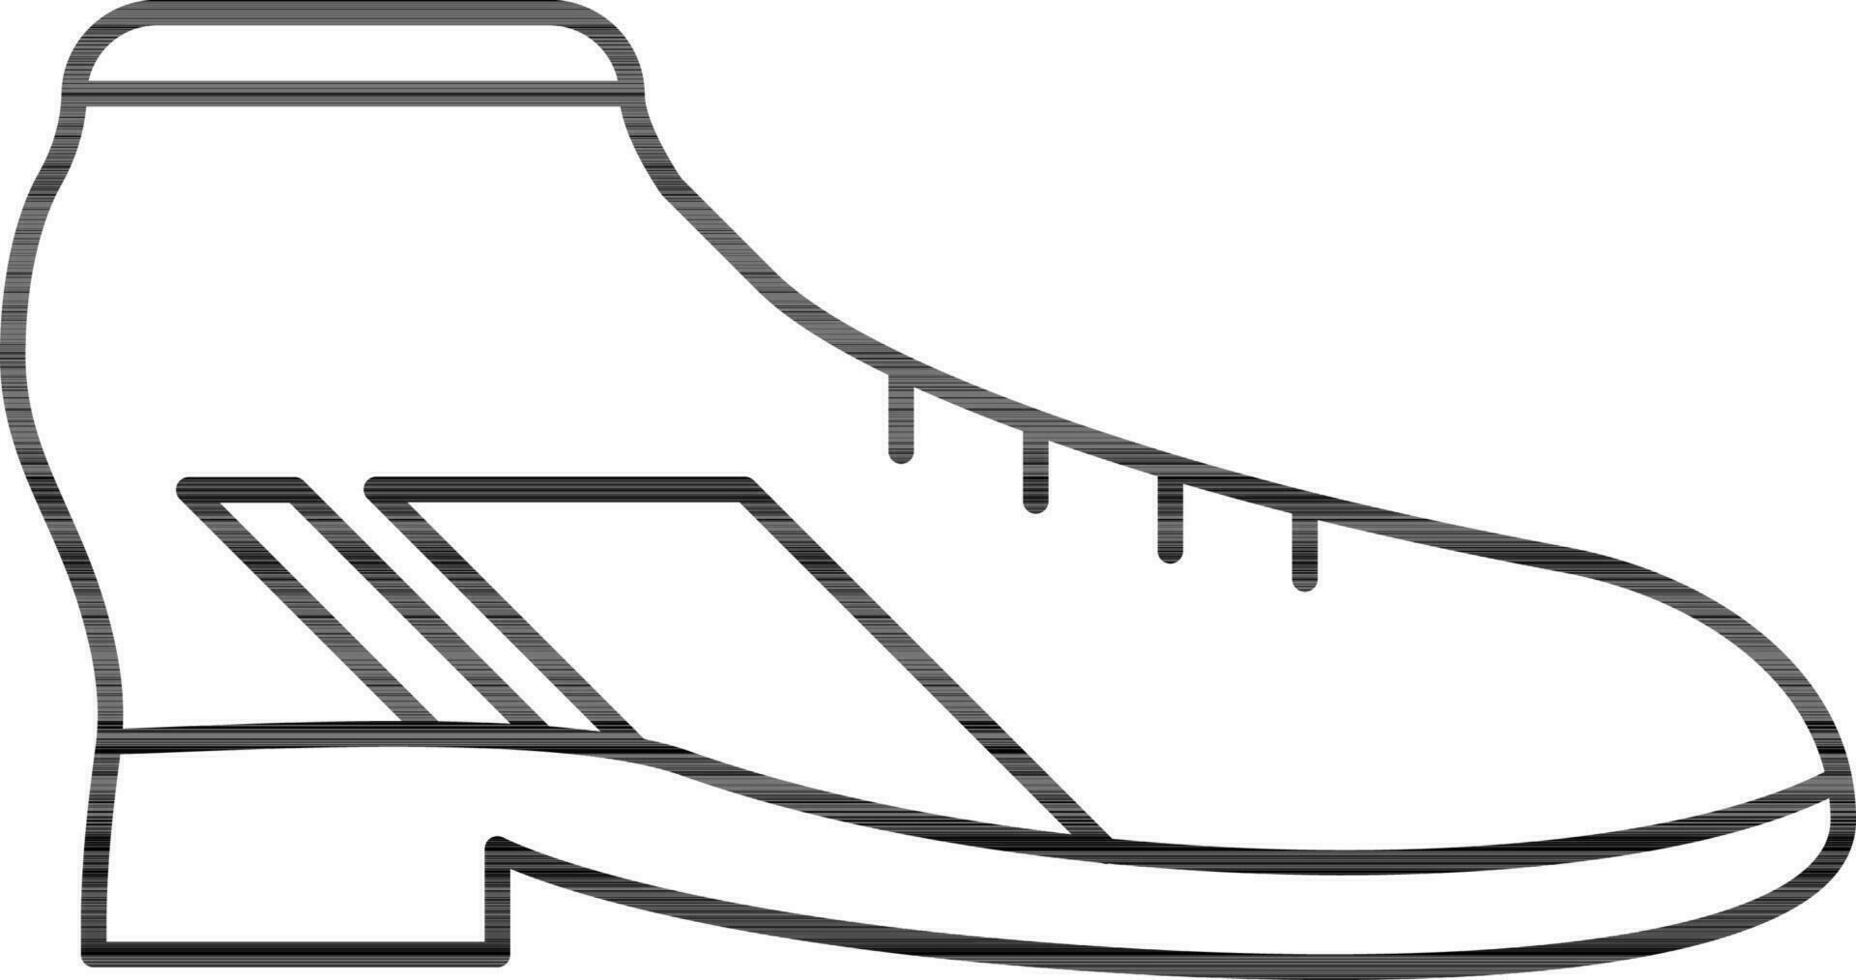 Running Shoes Icon In Black Outline. vector